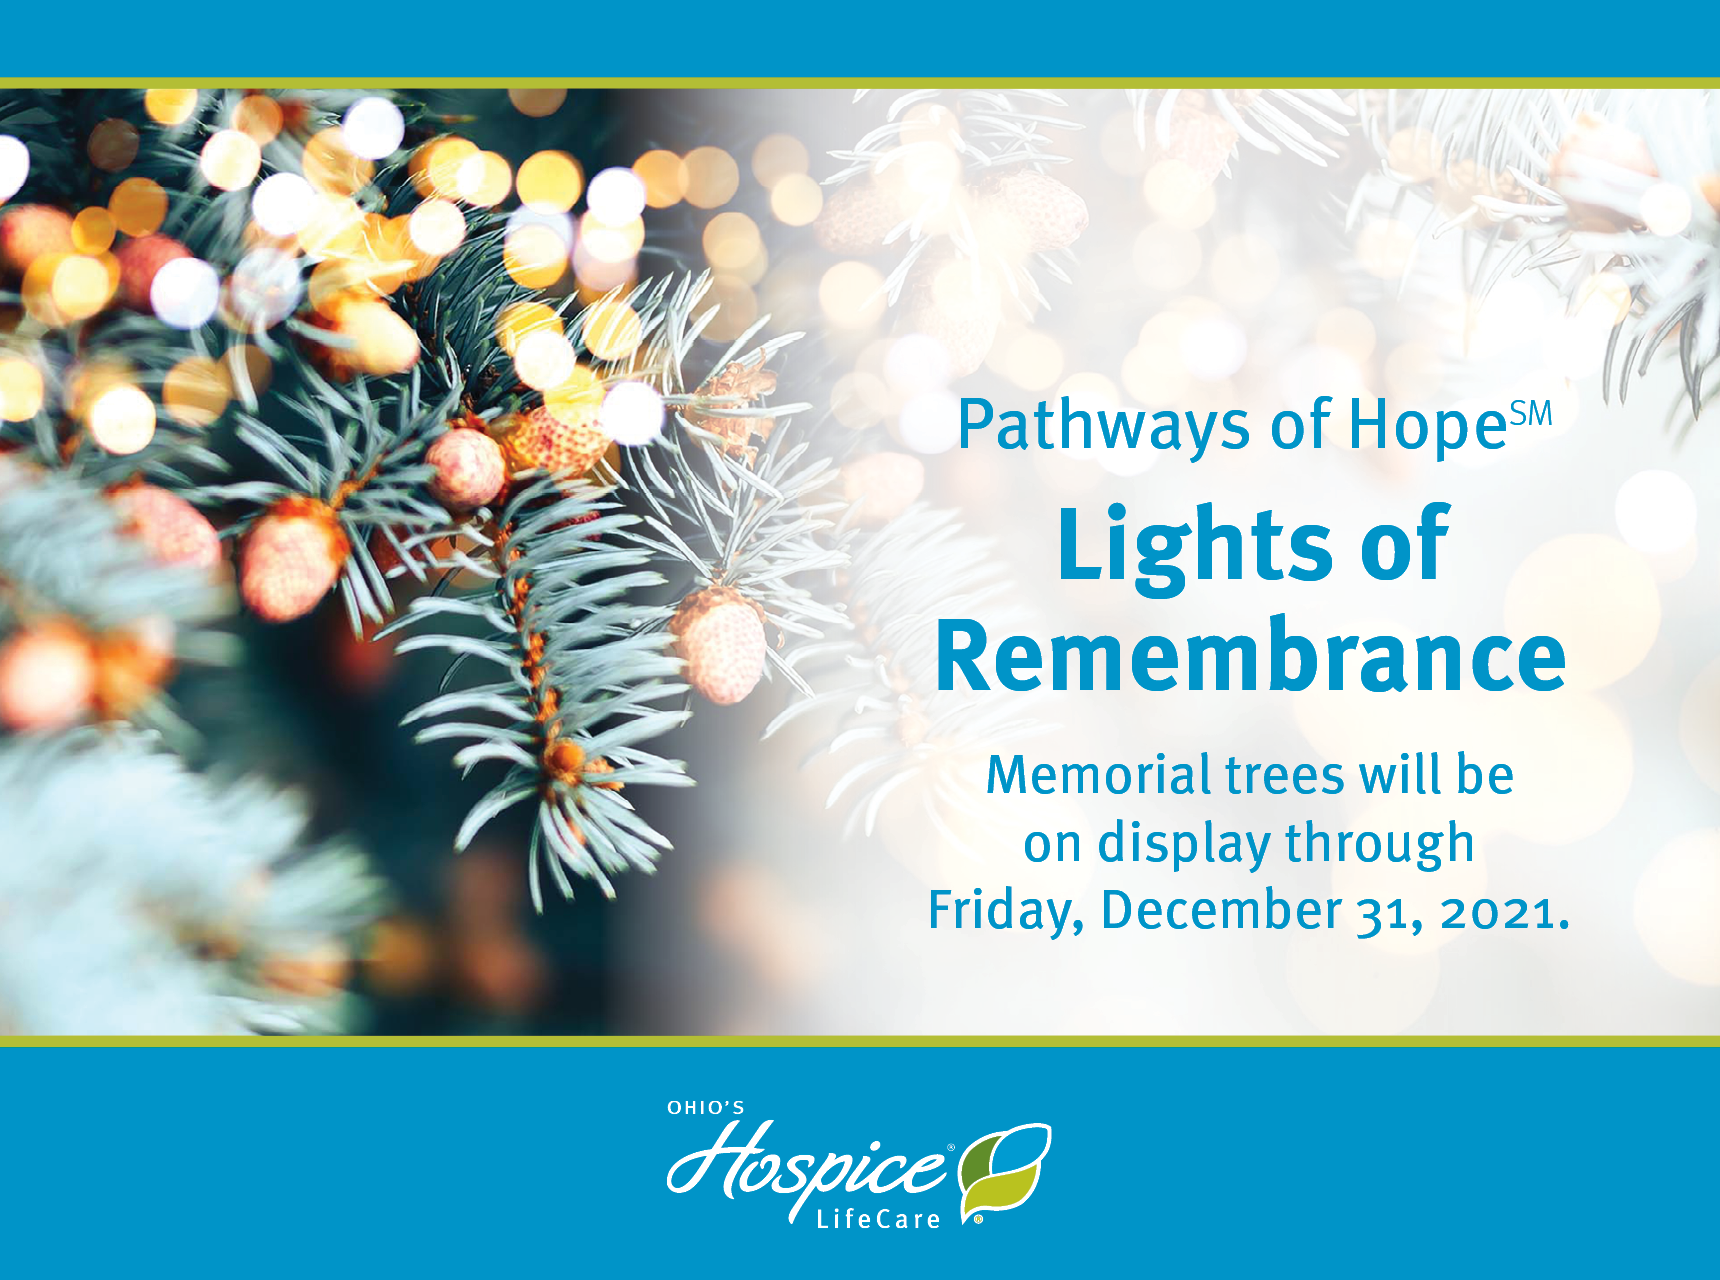 Pathways of Home Lights of Remembrance. Memorial trees will be on display through Friday, December 31, 2021.